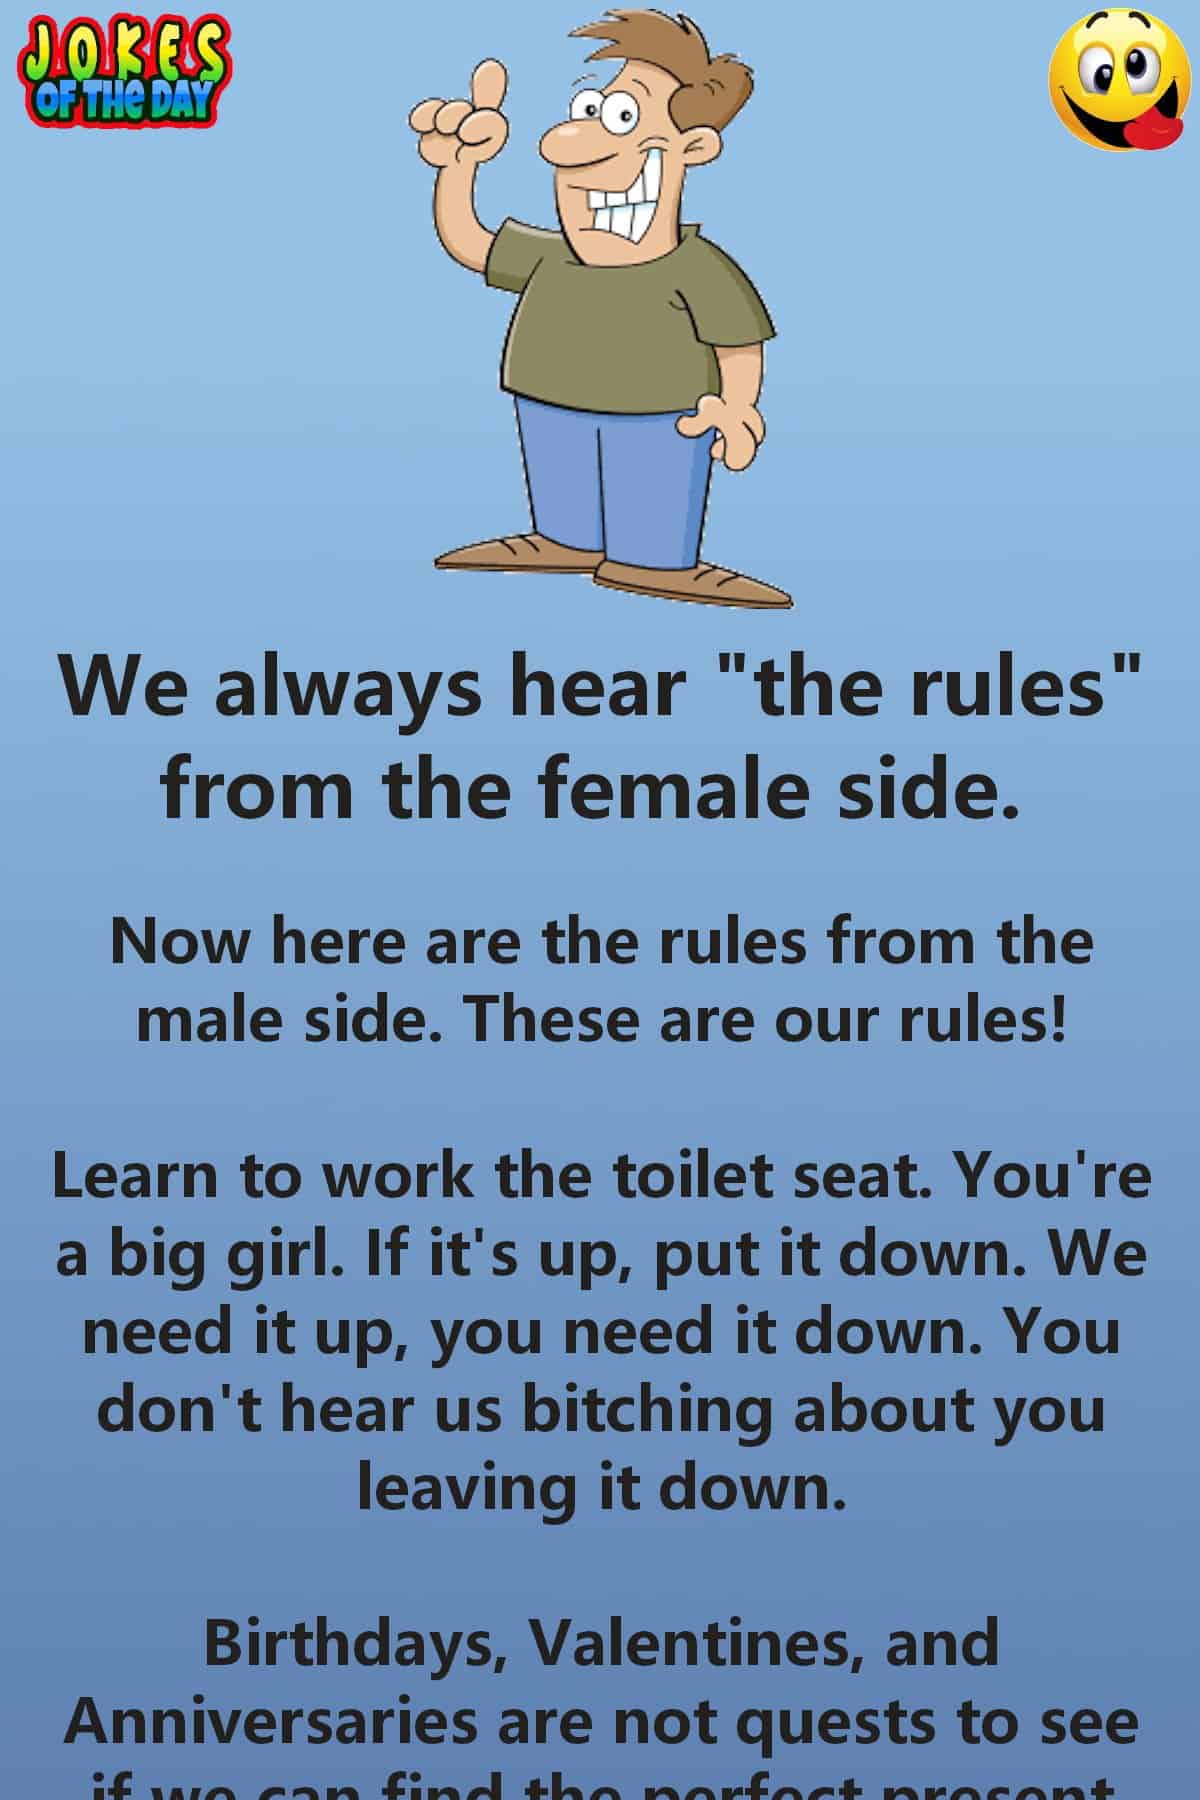 Humor - The rules from a man's perspective